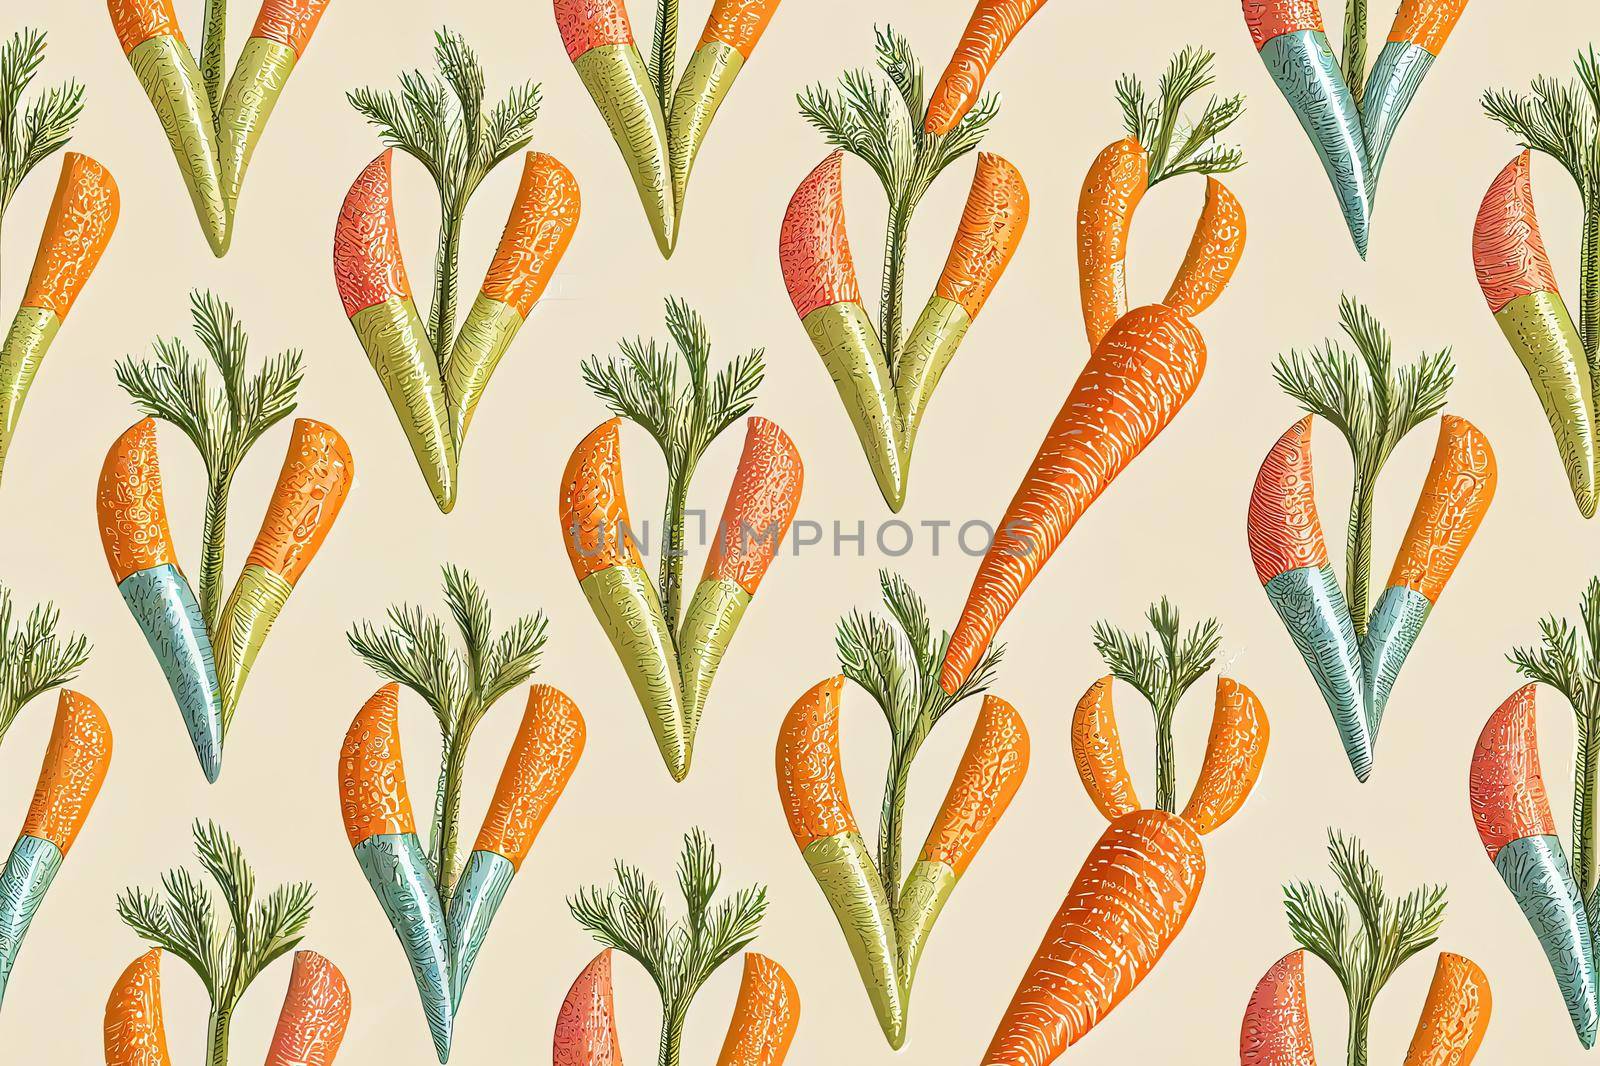 Striped carrot. Seamless doodle pattern. Cartoon design. texture. Easter decor element.. High quality illustration